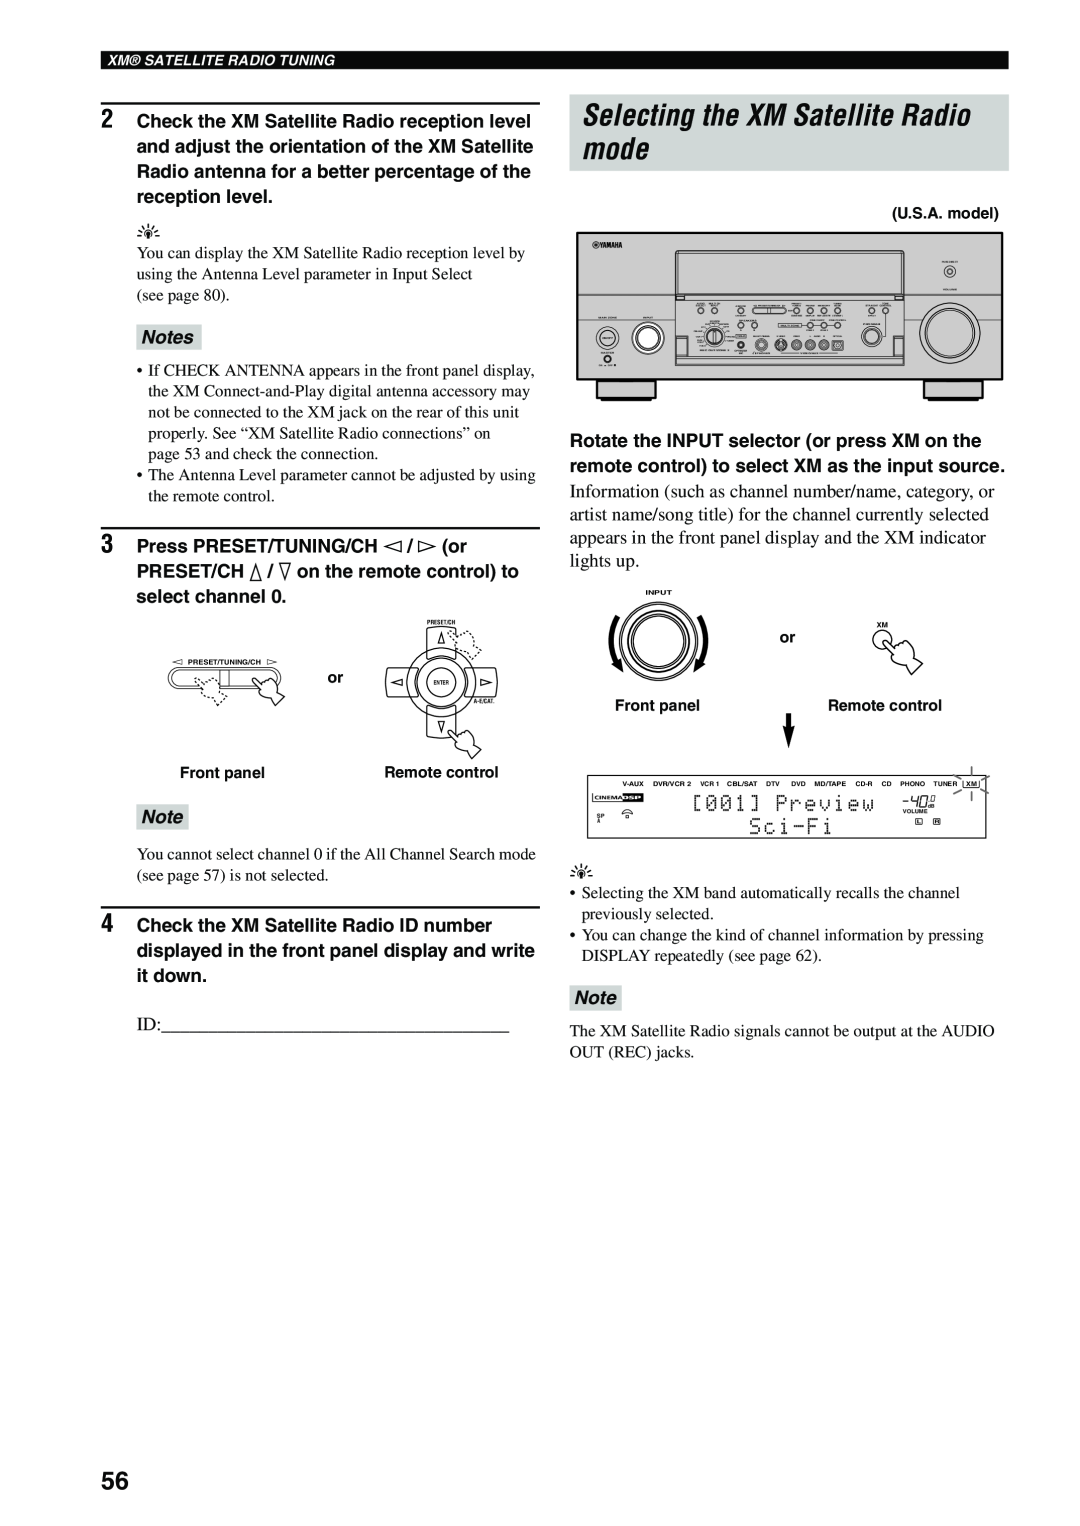 Yamaha X-V2600 owner manual Selecting the XM Satellite Radio mode, Preview, Sci-Fi, Notes 